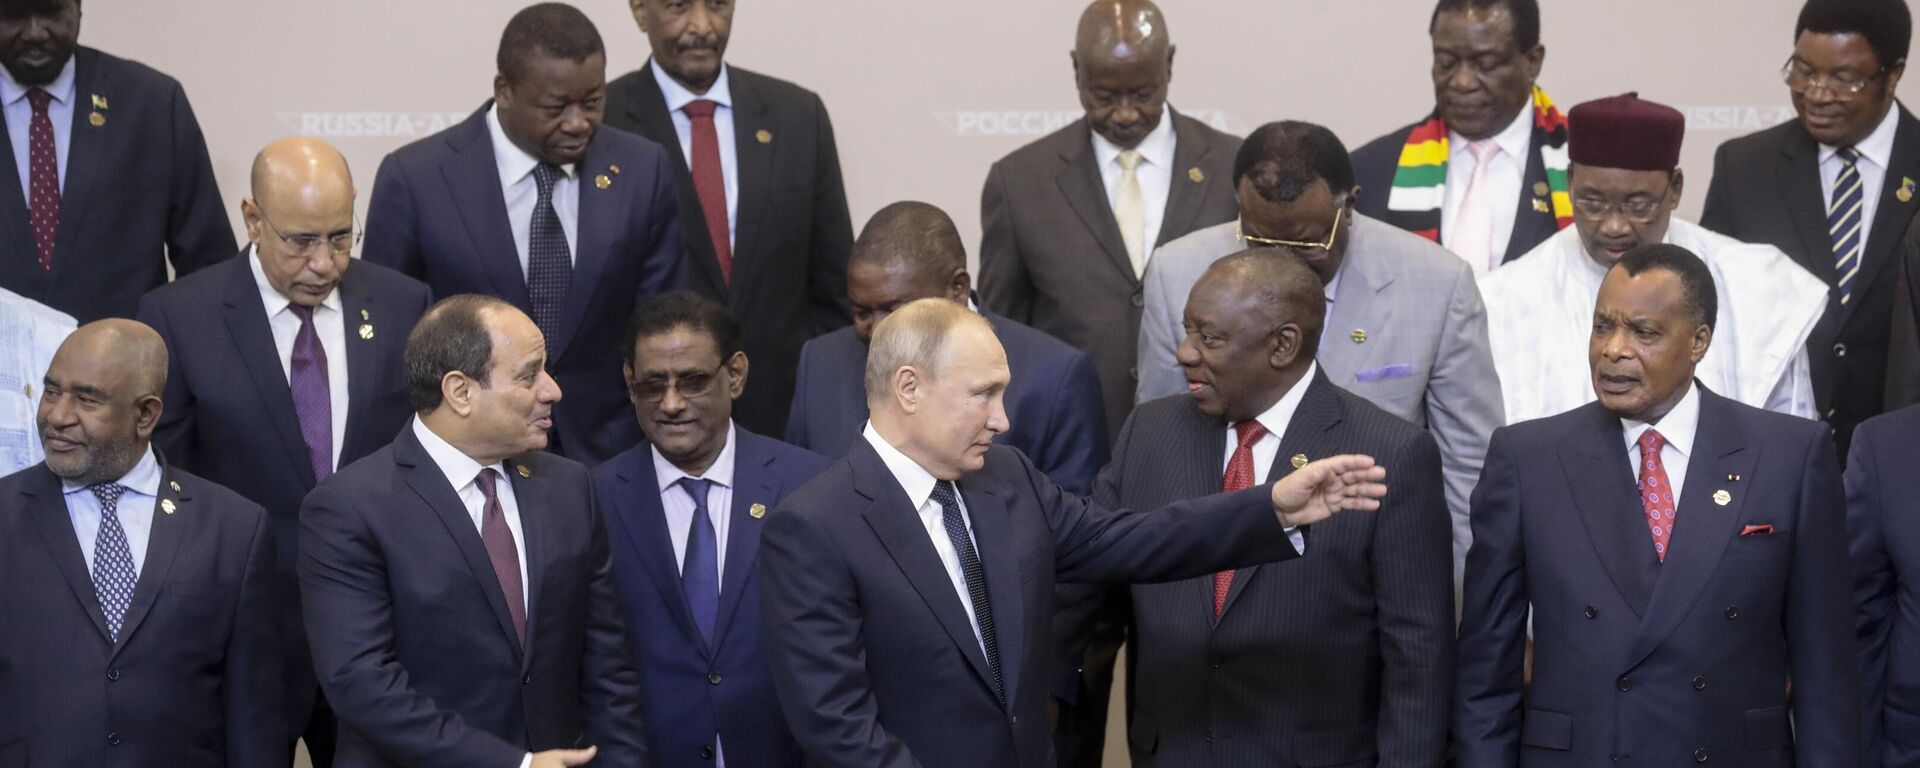 Russian President Vladimir Putin, center, gestures while posing for a photo with leaders of African countries at the Russia-Africa summit in the Black Sea resort of Sochi, Russia, Thursday, Oct. 24, 2019. - Sputnik International, 1920, 04.02.2023